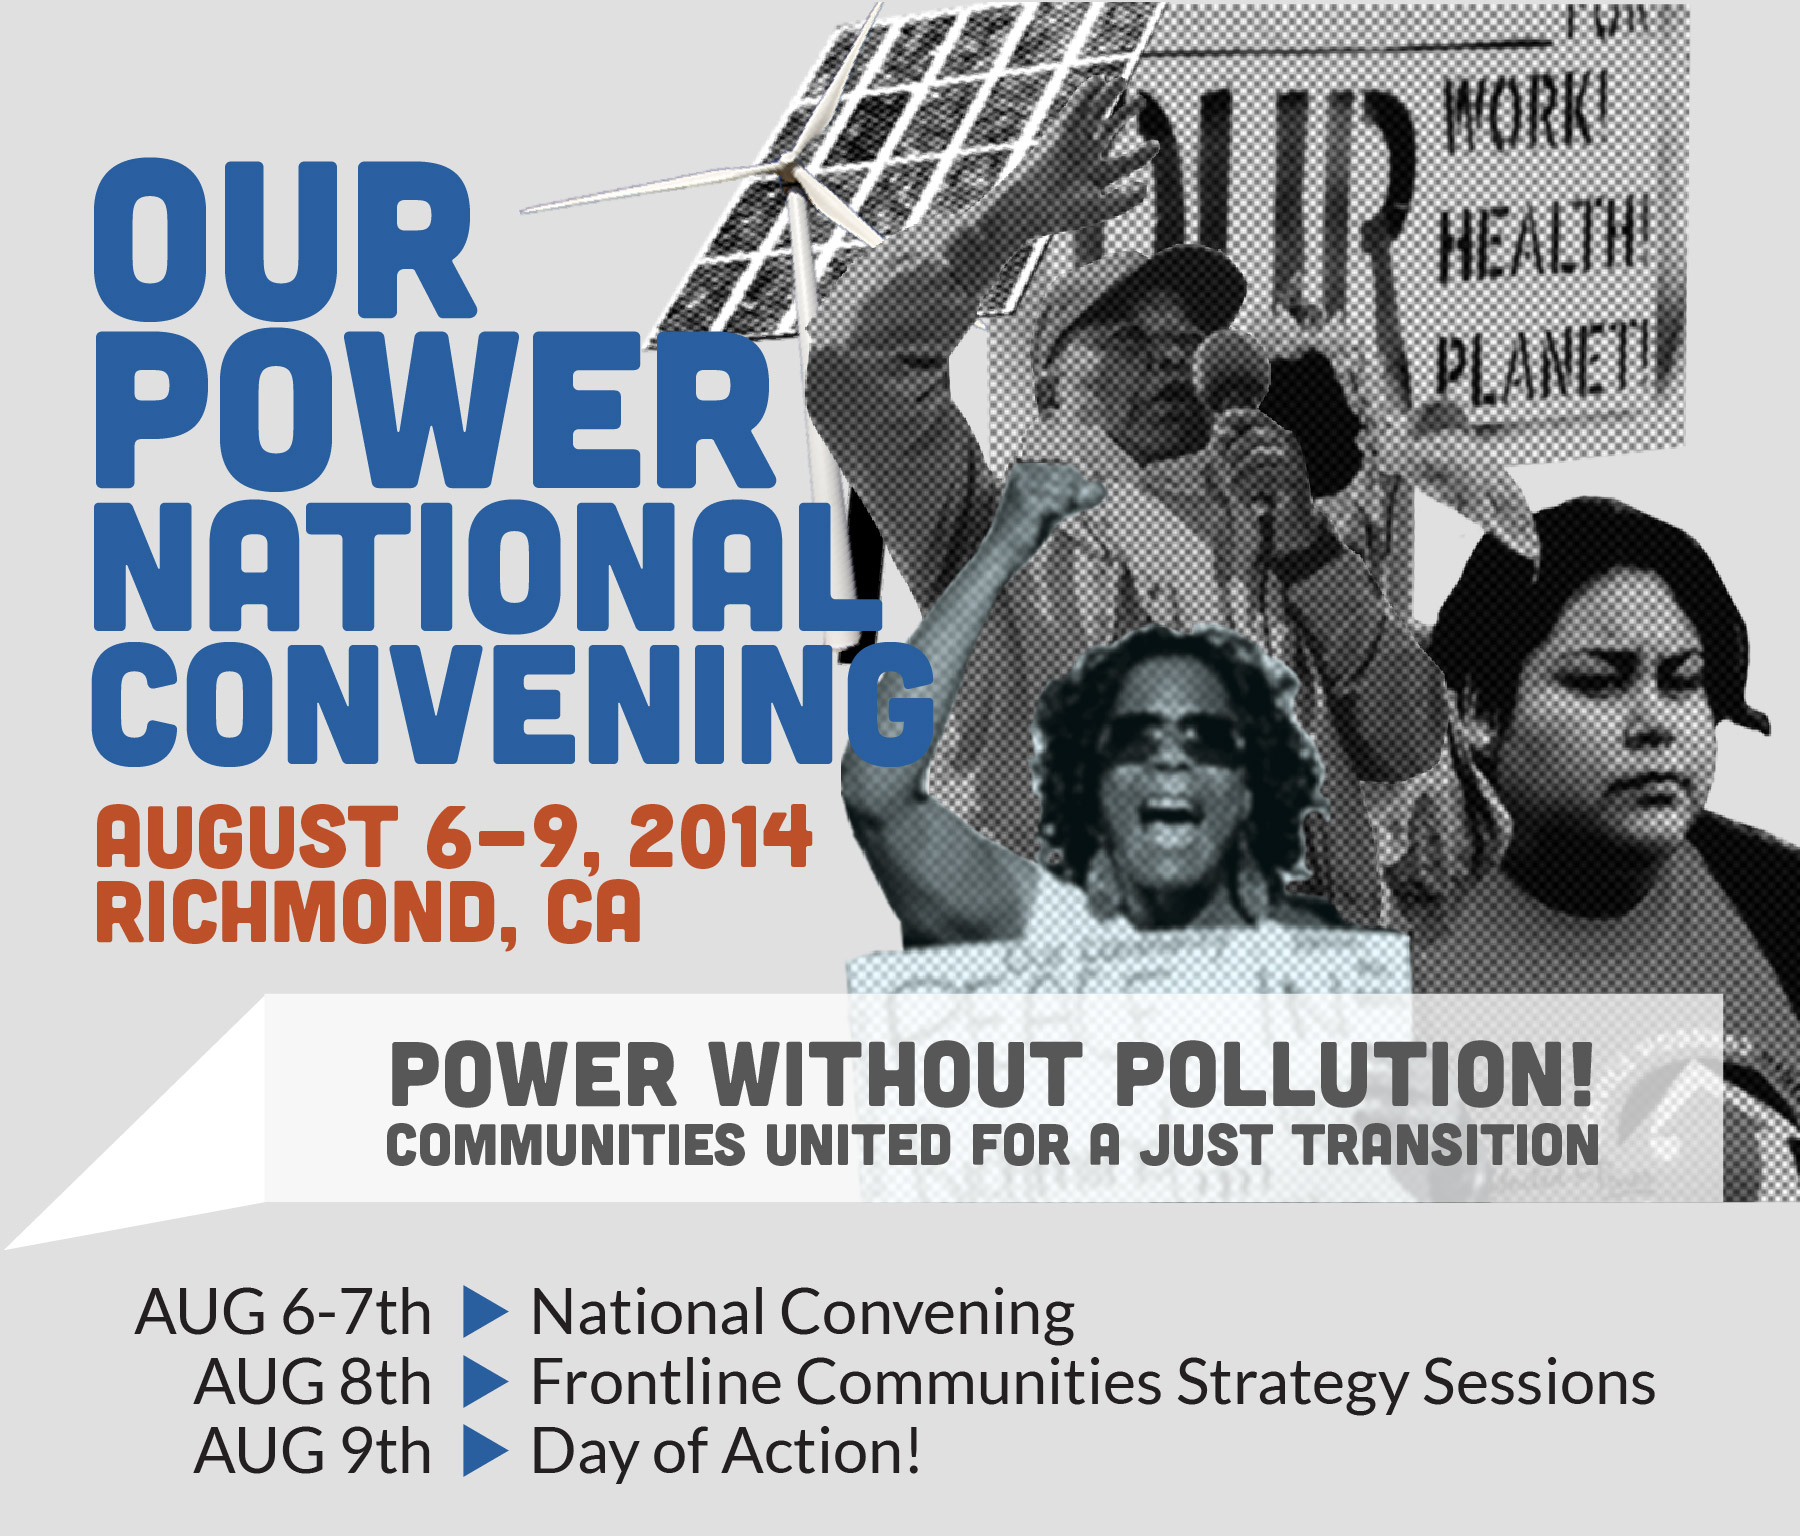 Our Power National Convening